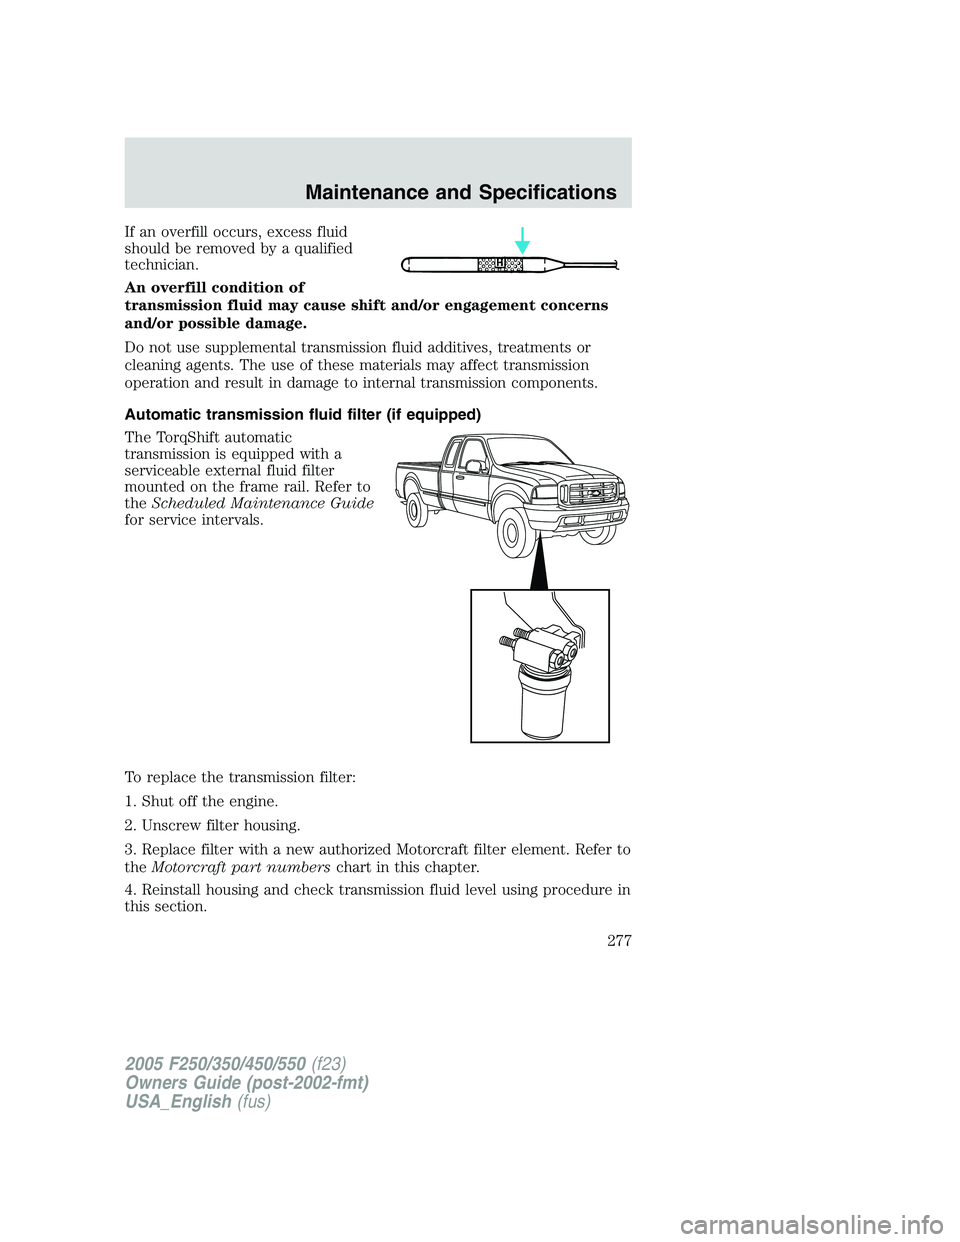 FORD F250 SUPER DUTY 2005  Owners Manual If an overfill occurs, excess fluid
should be removed by a qualified
technician.
An overfill condition of
transmission fluid may cause shift and/or engagement concerns
and/or possible damage.
Do not u